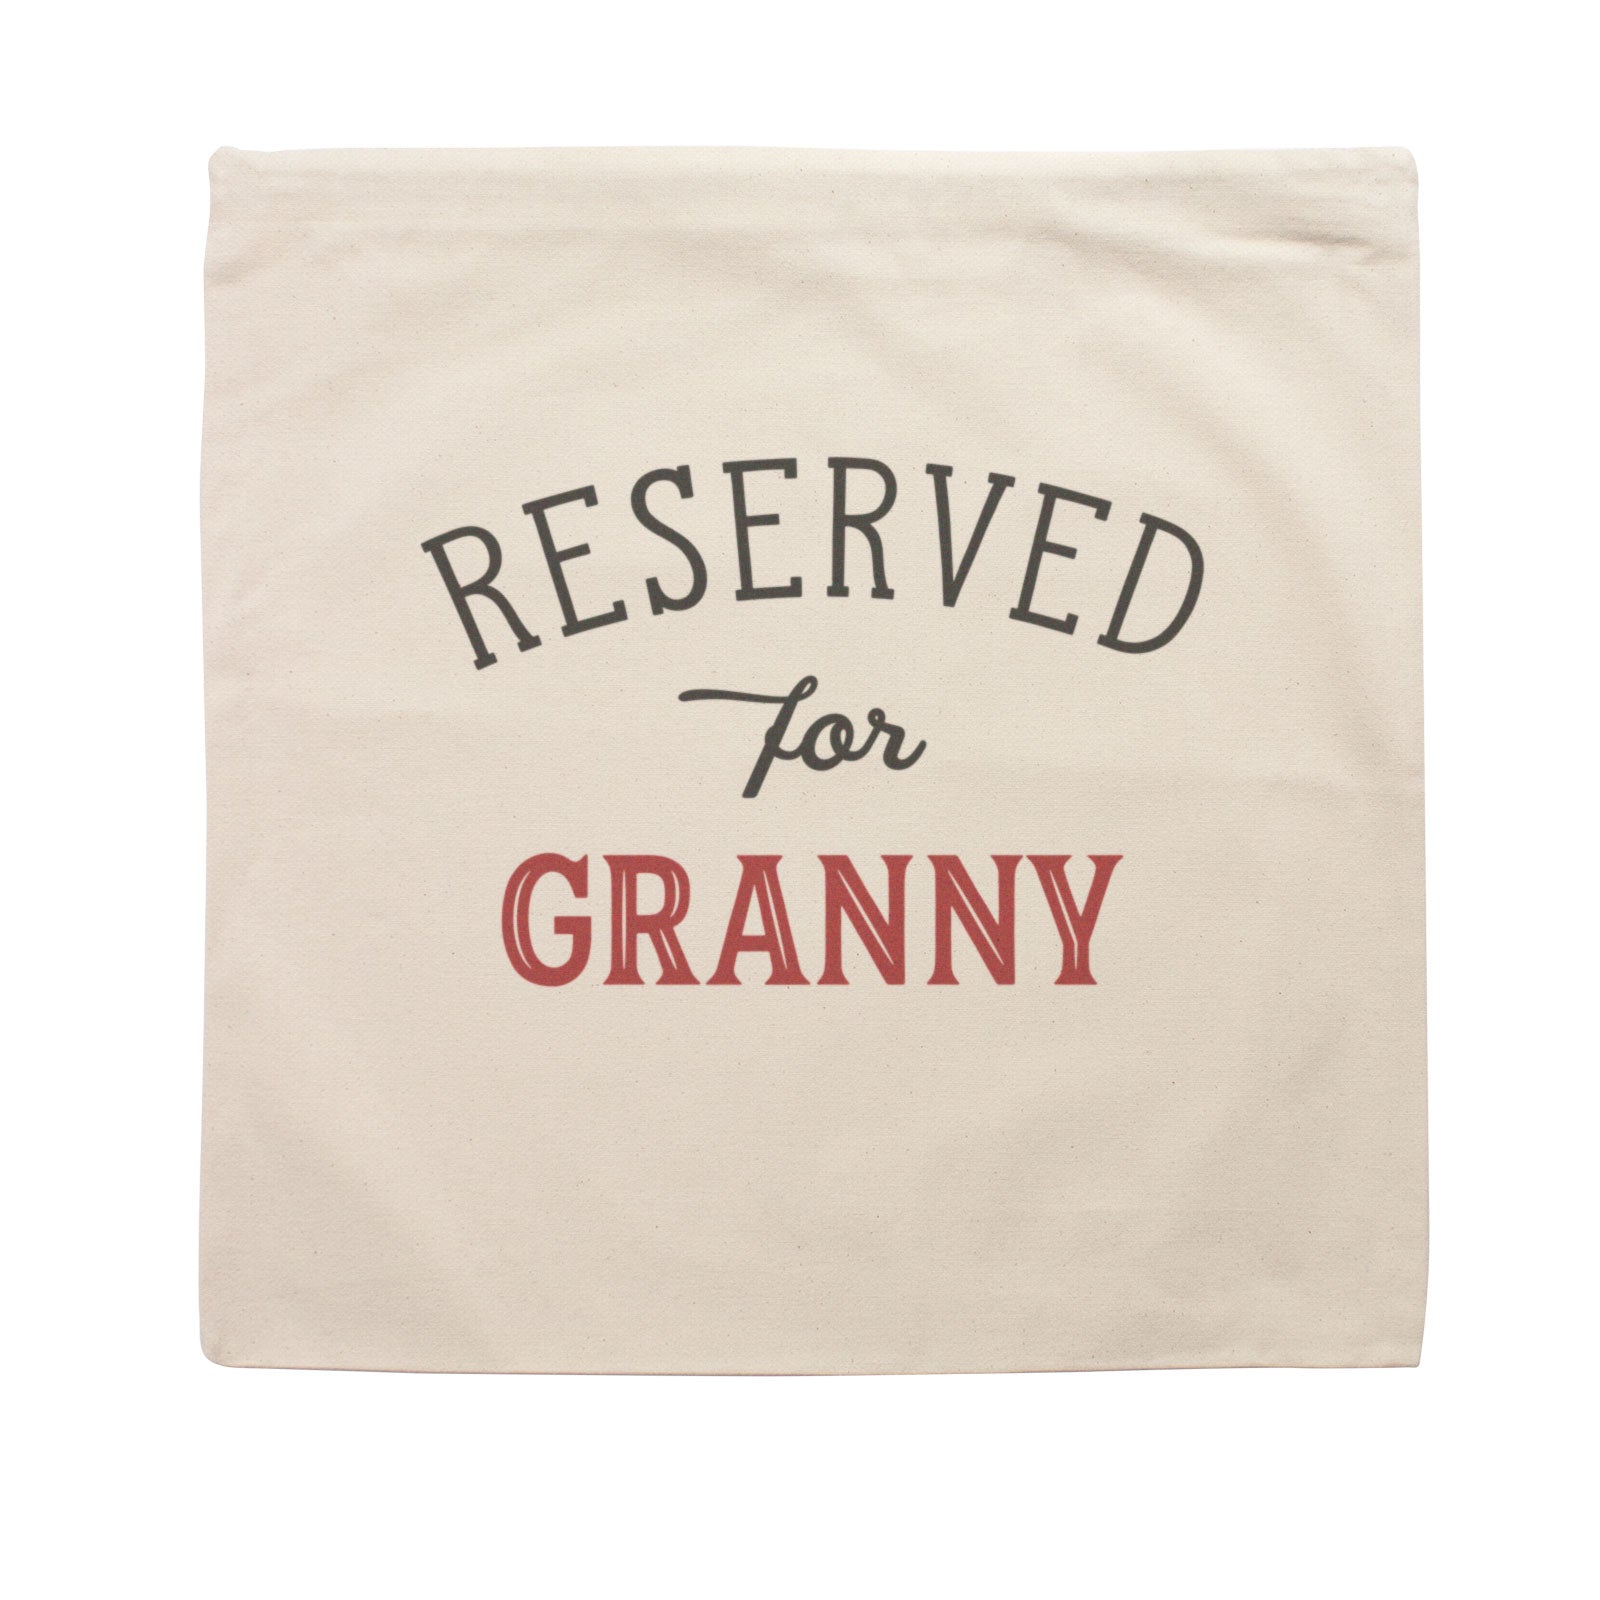 Reserved for Granny Cushion Cover